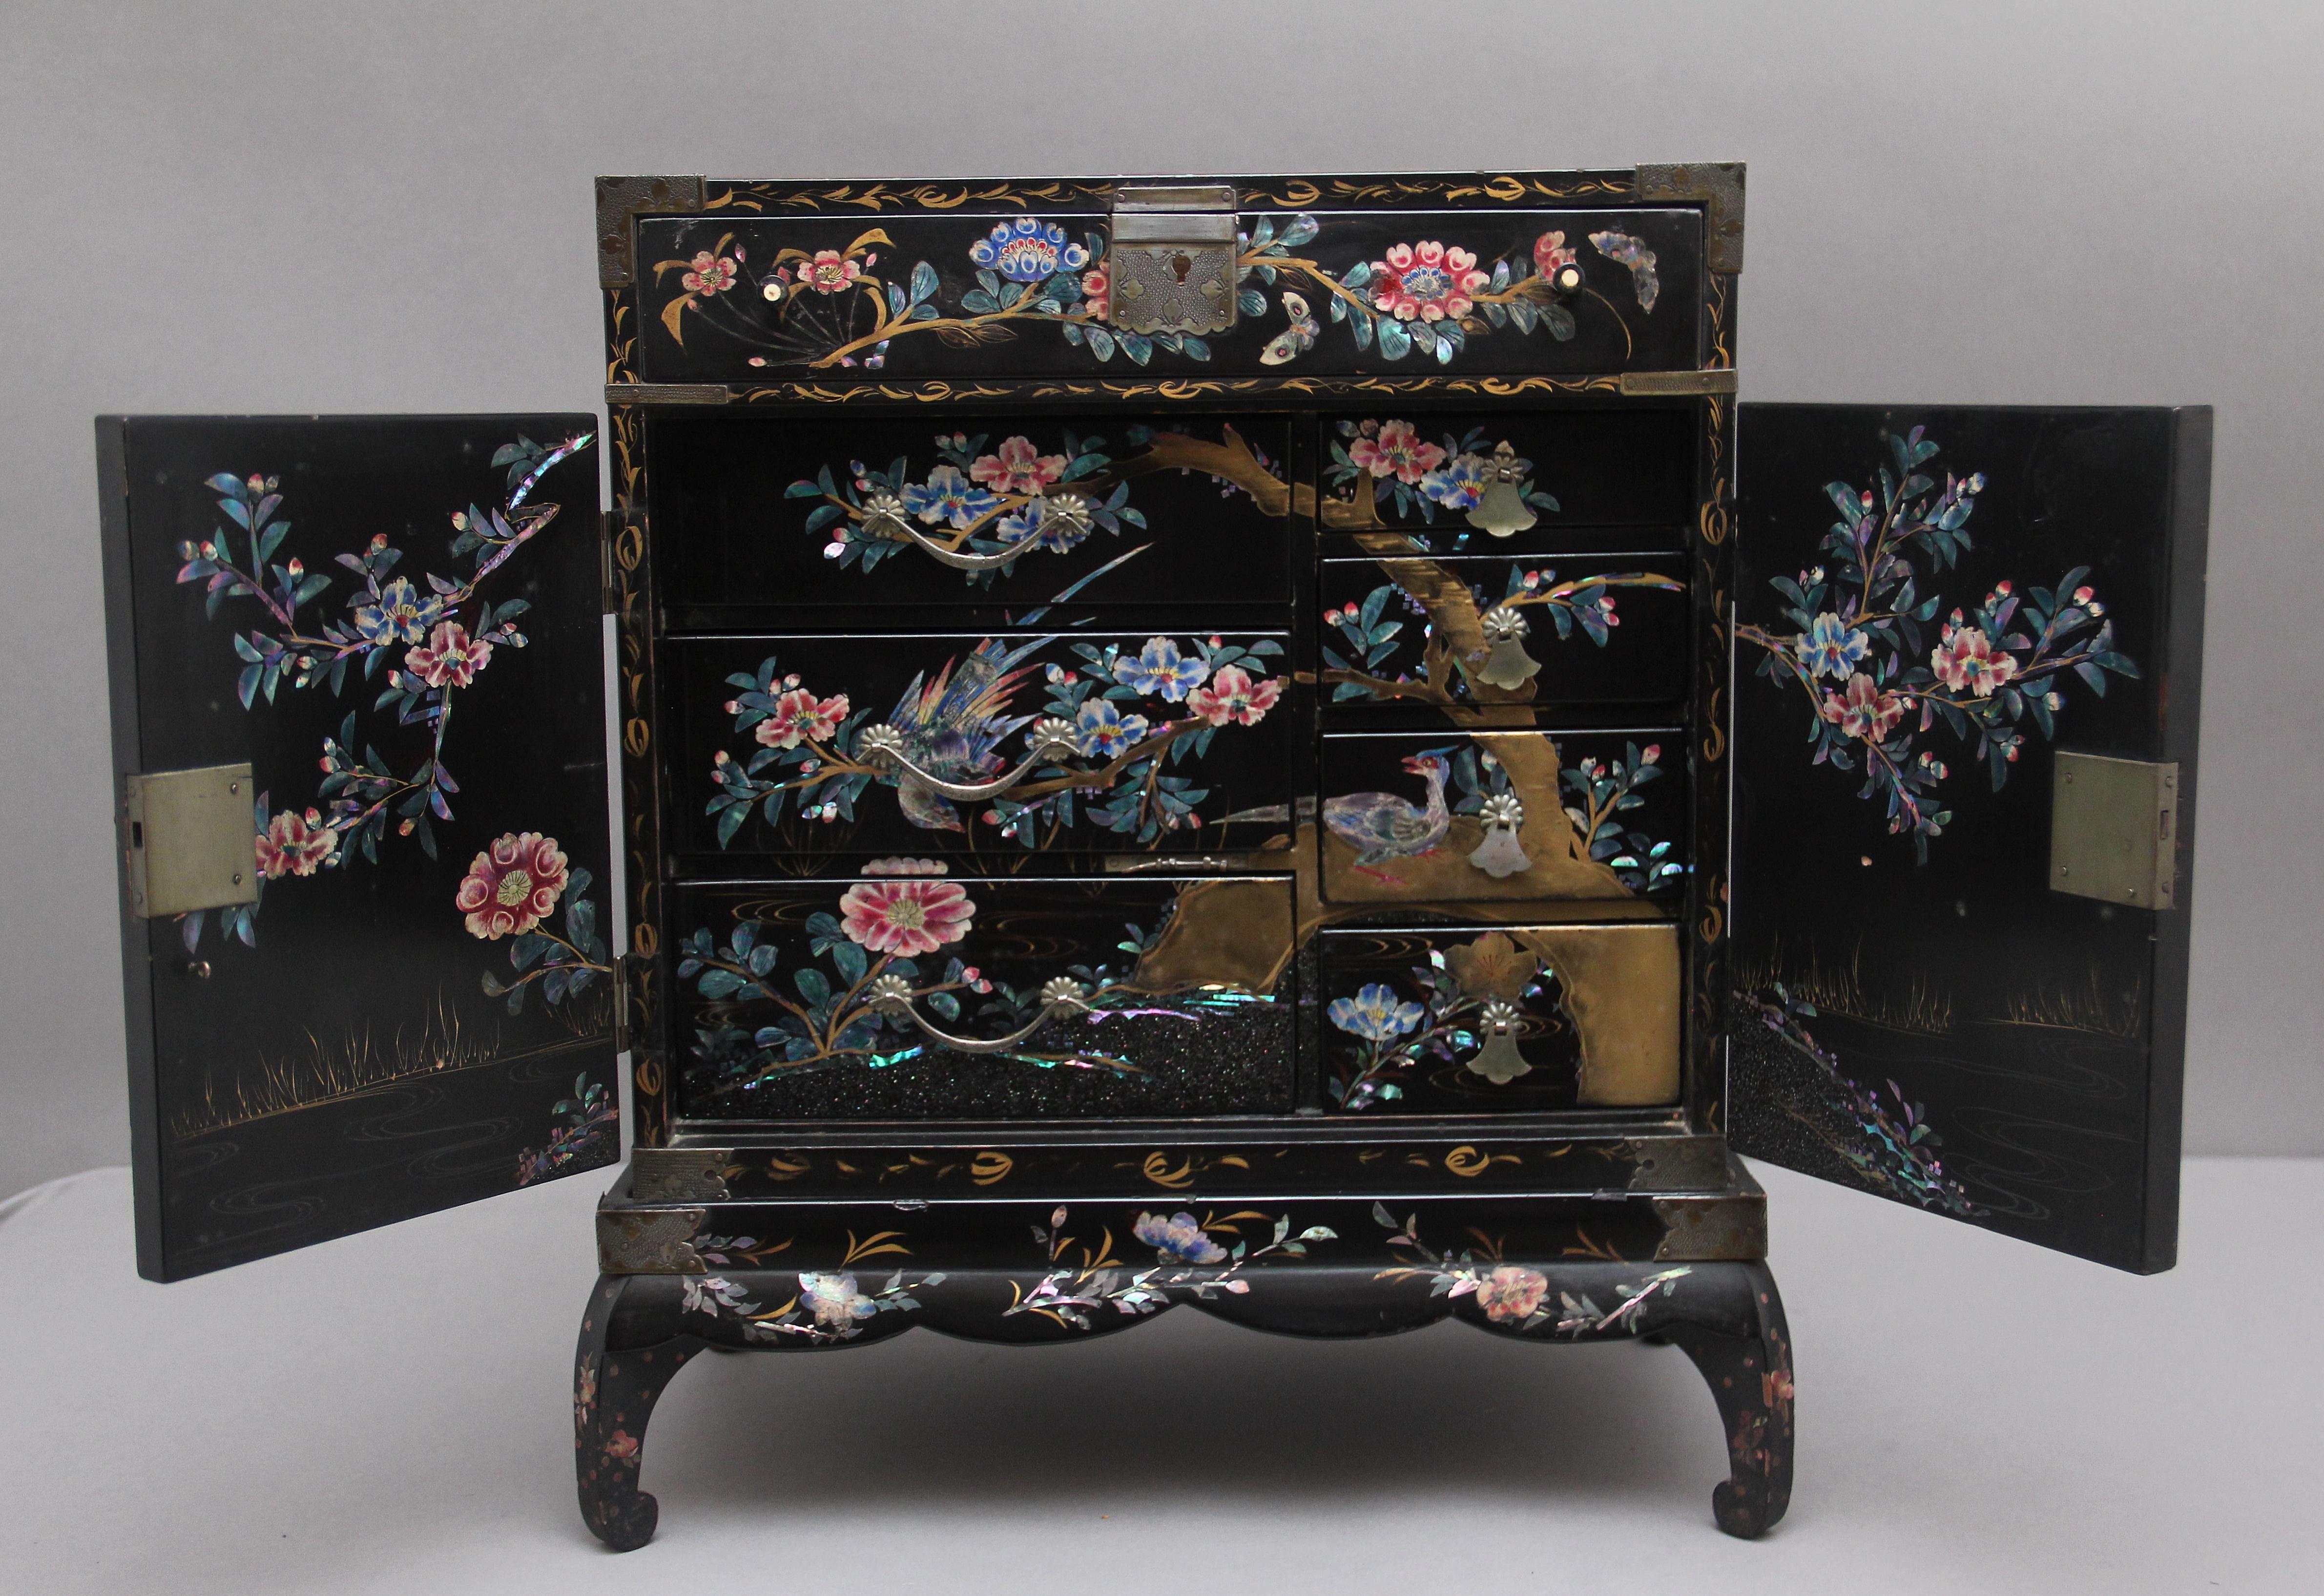 19th Century freestanding Japanese black lacquered table top cabinet on stand (Ko-dansu) from the Meiji period (1868-1912) profusely inlaid all over with floral inlay, with the top of the cabinet and the front door panels having a detailed nature